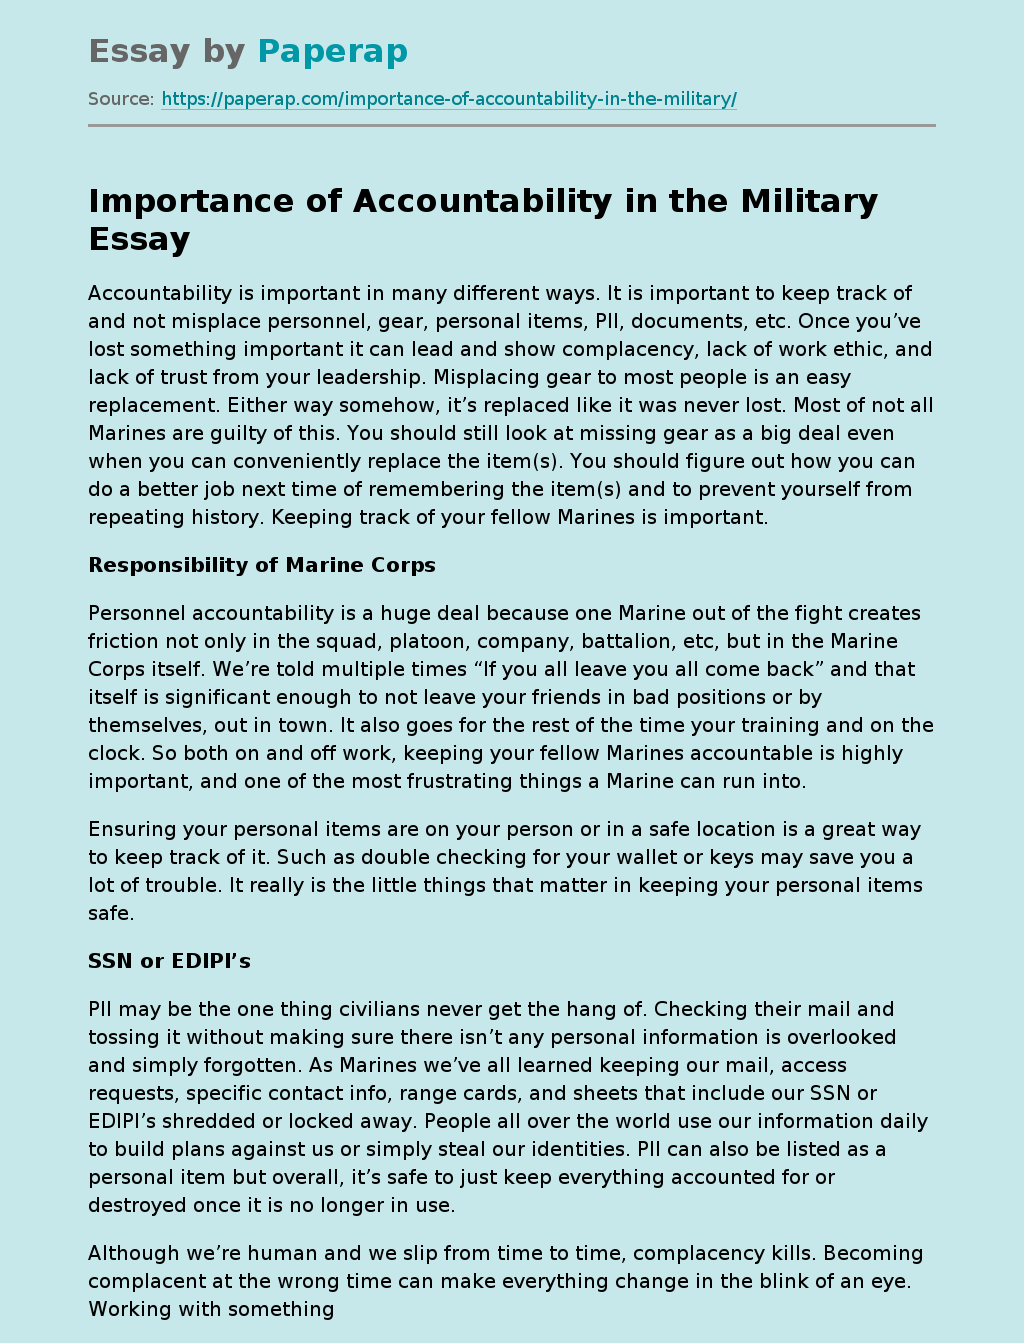 Importance of Accountability in the Military